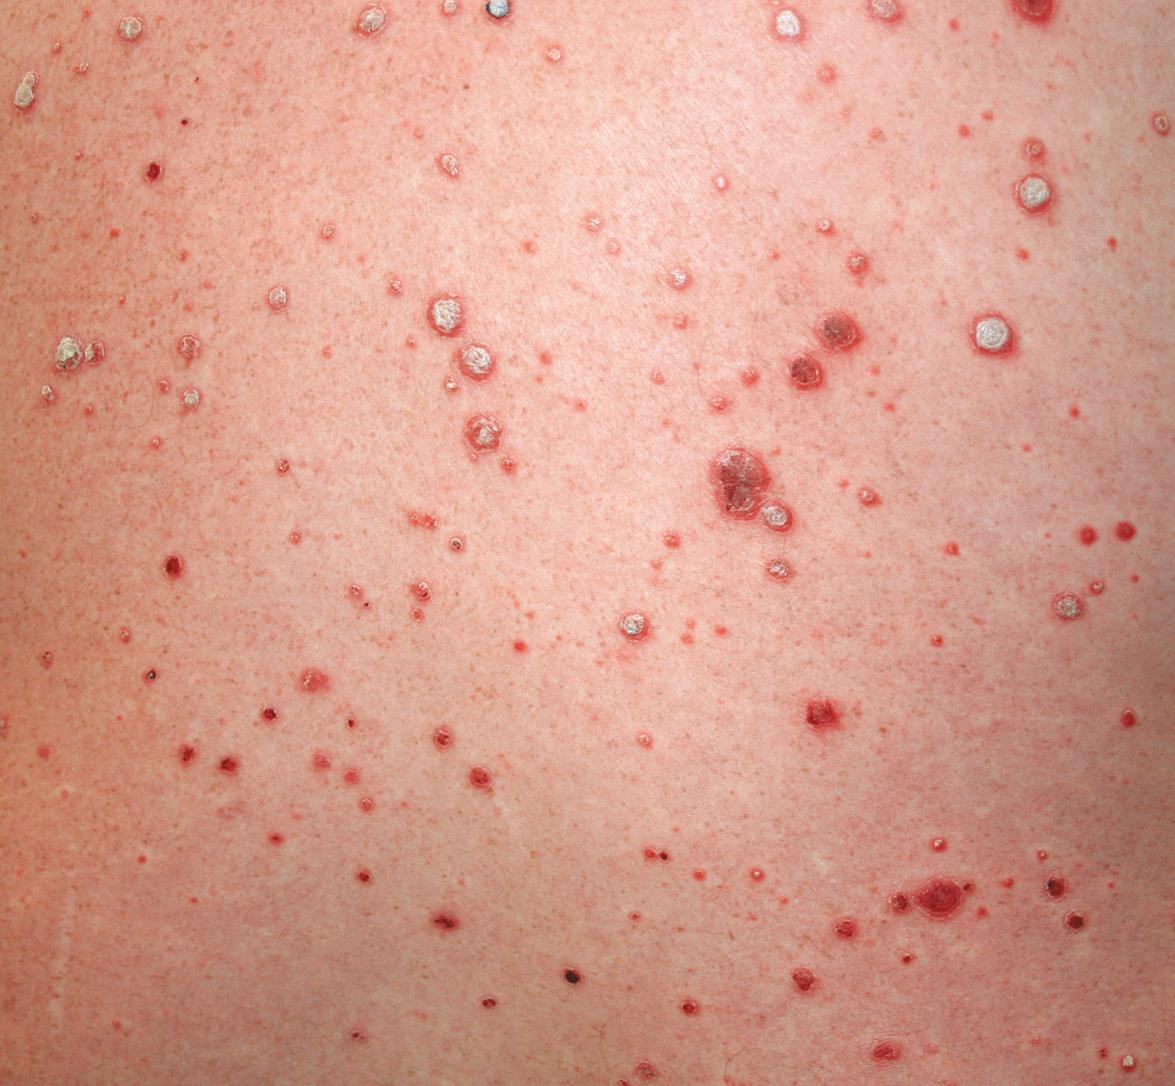 Fig. 128.2, Interferon-induced flare of psoriasis.